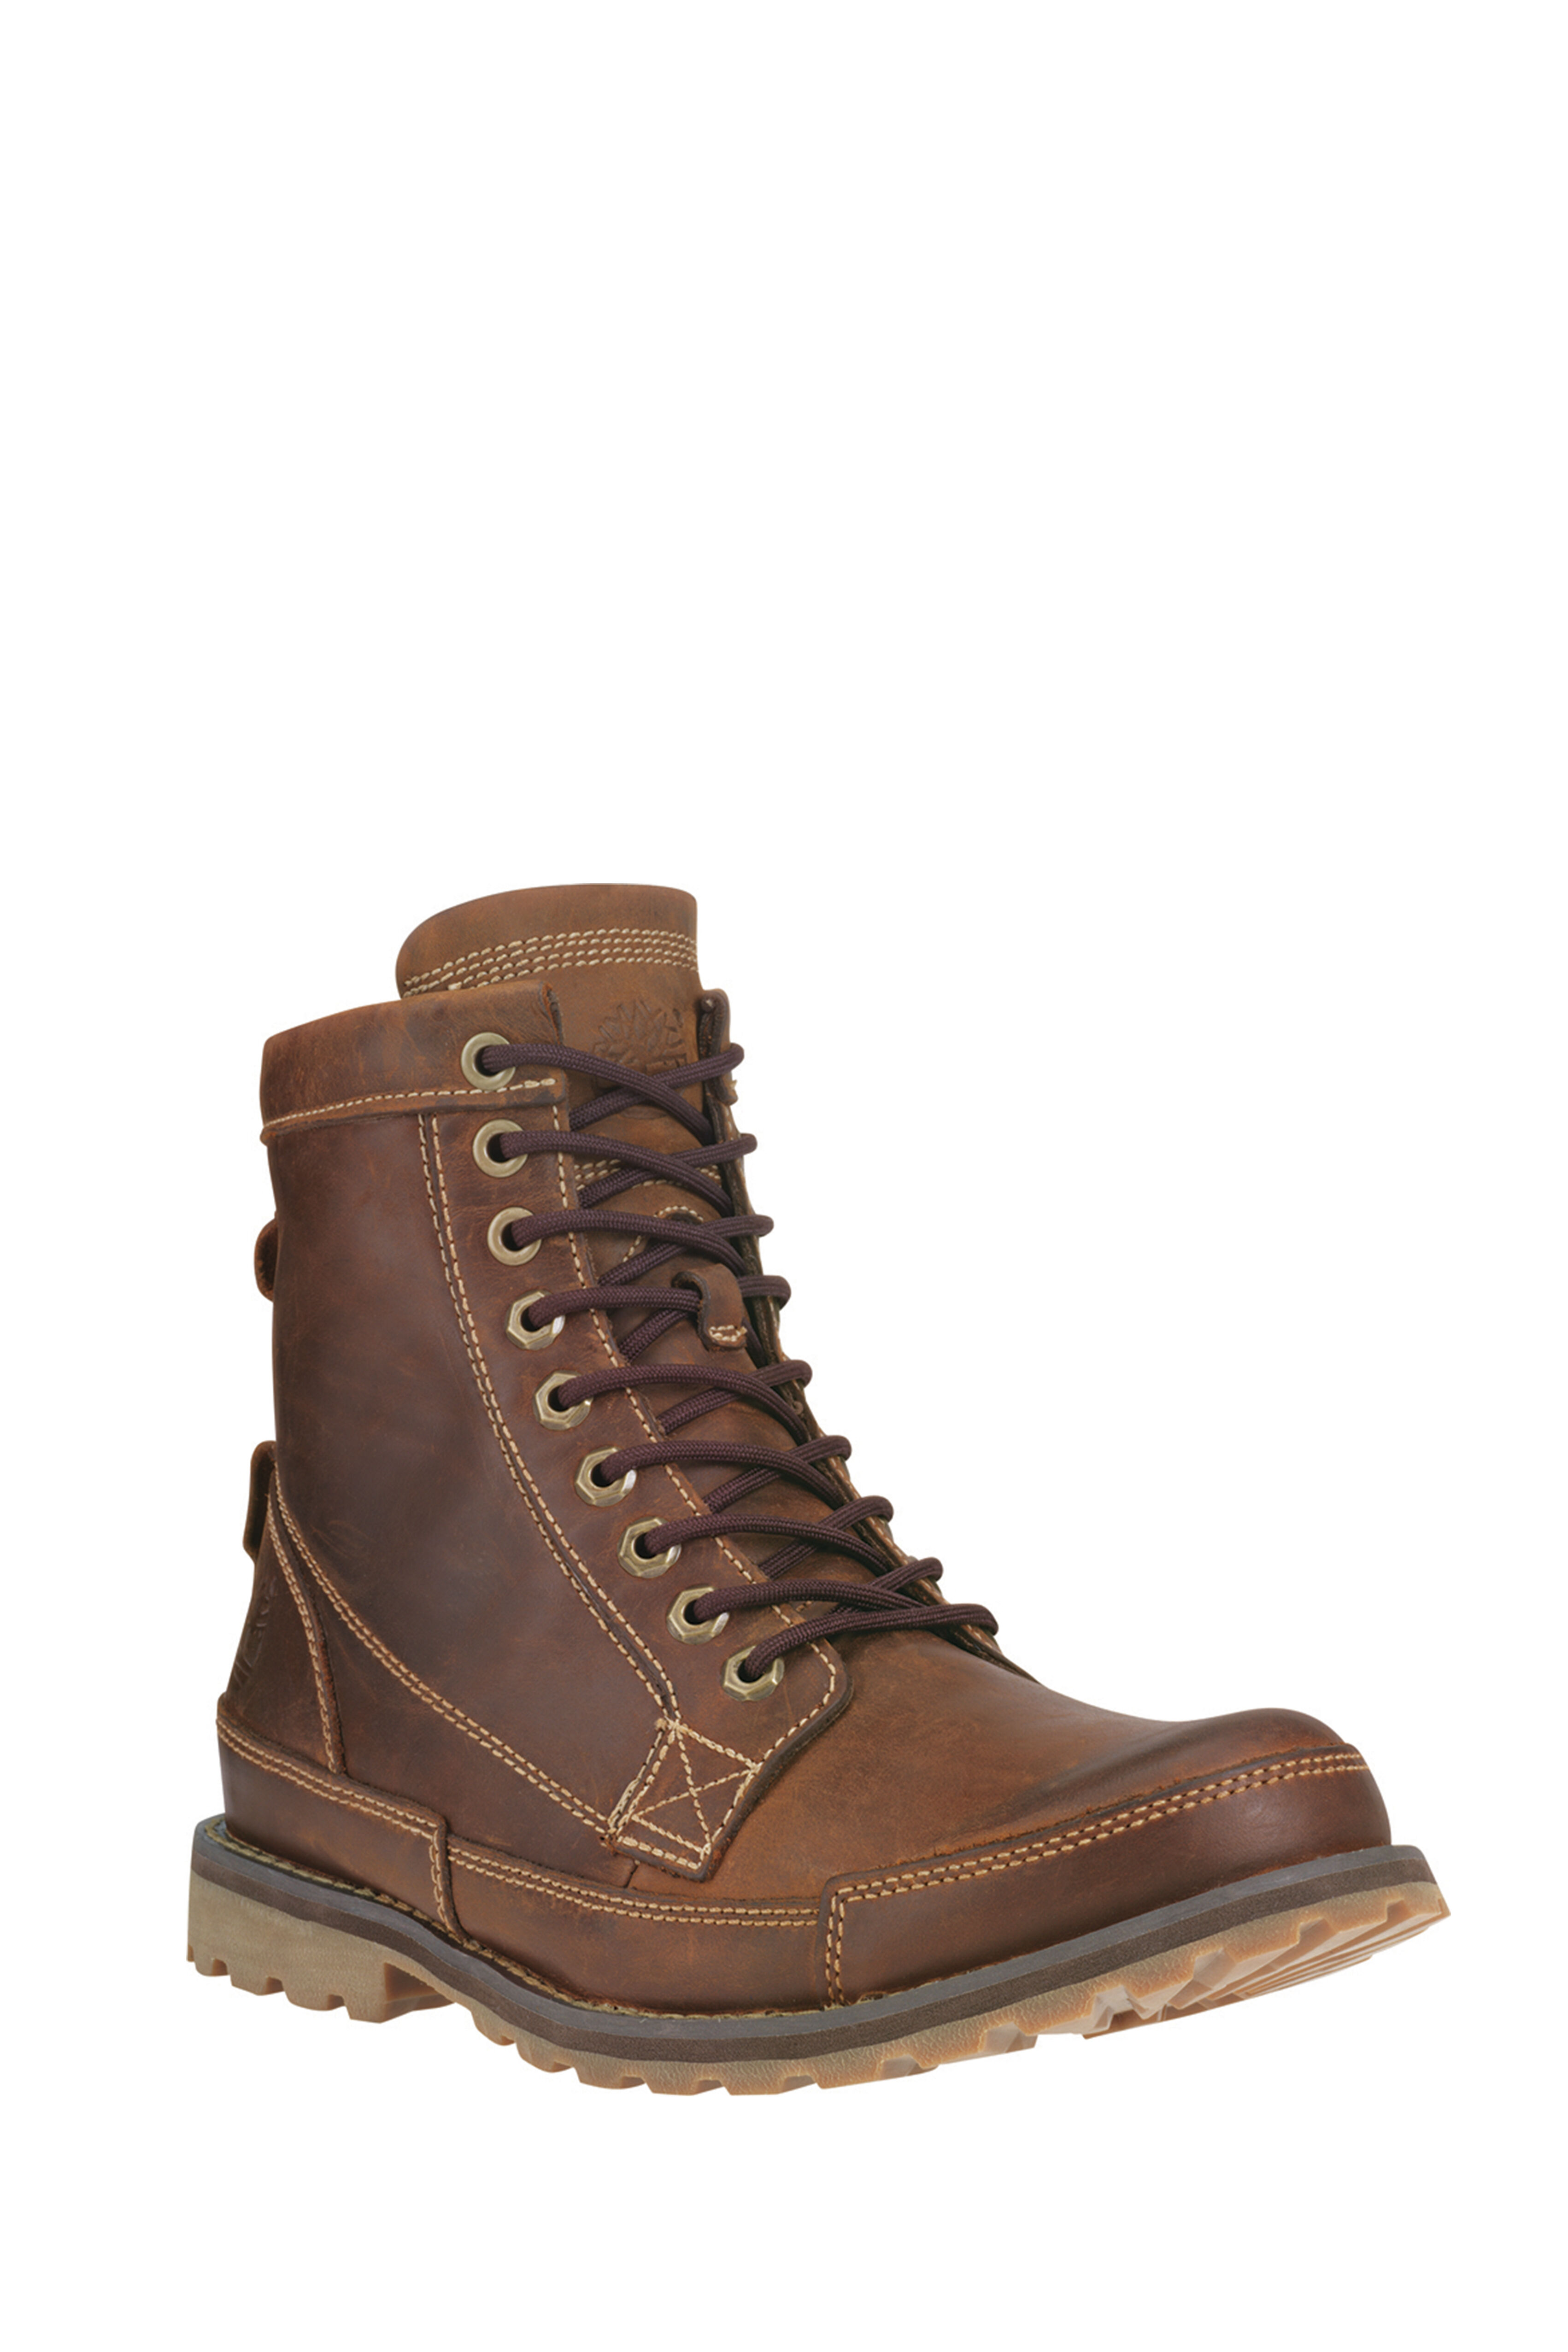 boots similar to timberland earthkeepers